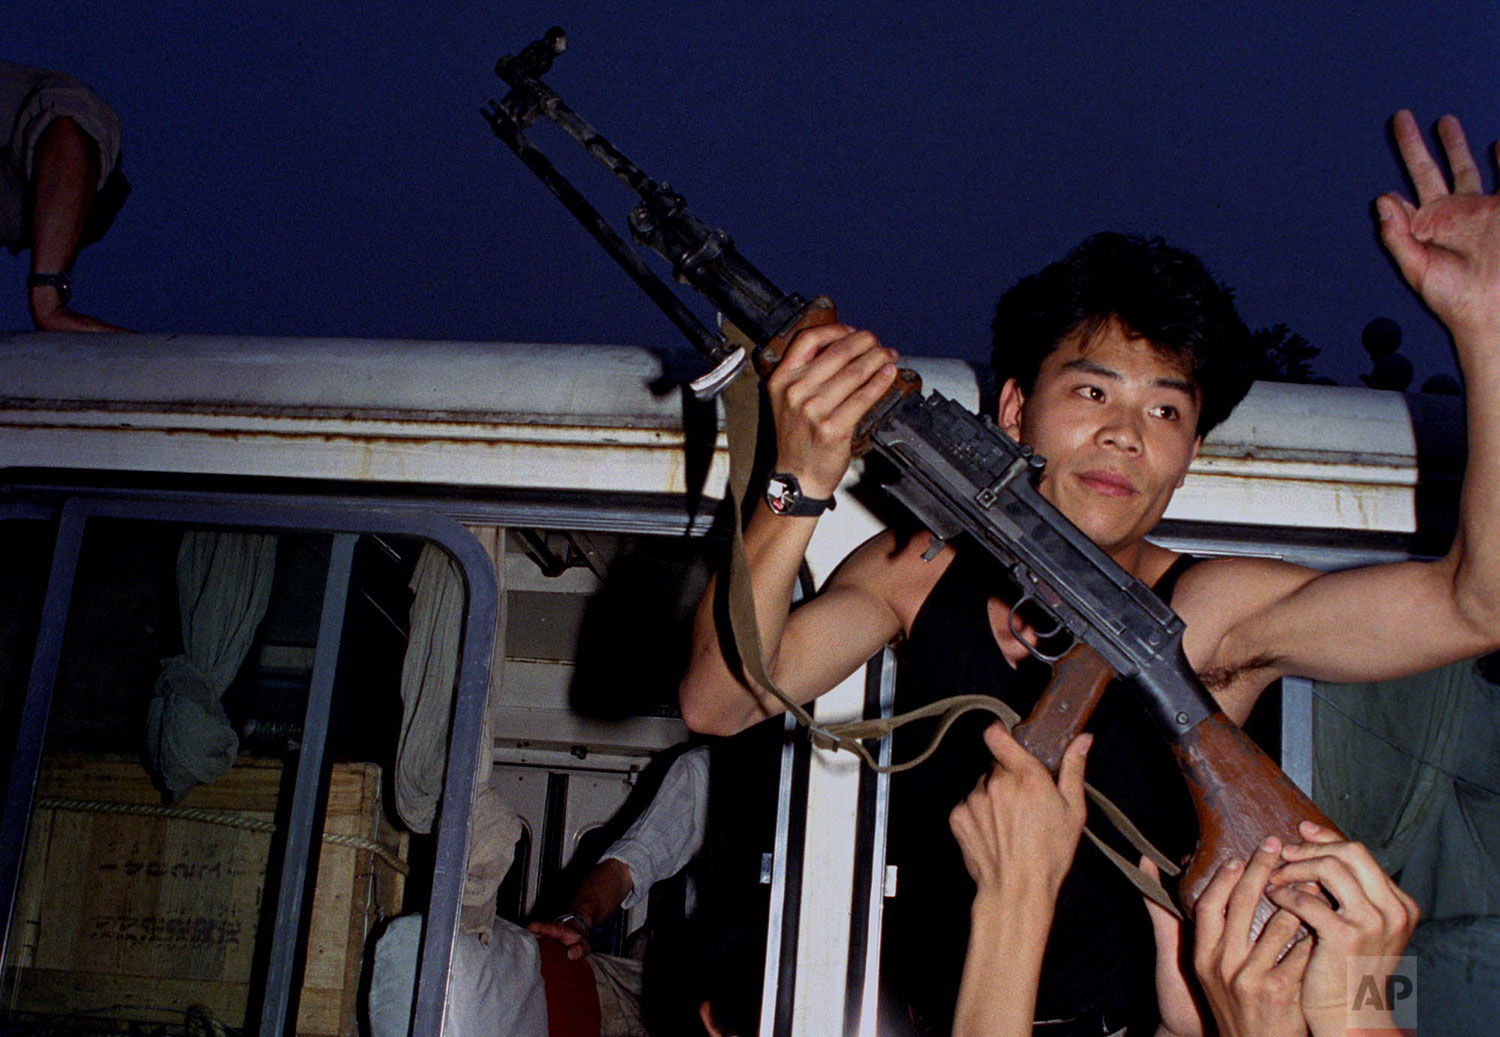  An anti-government protester in Beijing holds a rifle in a bus window, June 3, 1989. Pro-democracy protesters had been occupying Tiananmen Square for weeks; hundreds died that night and the following morning in clashes with Chinese troops. (AP Photo